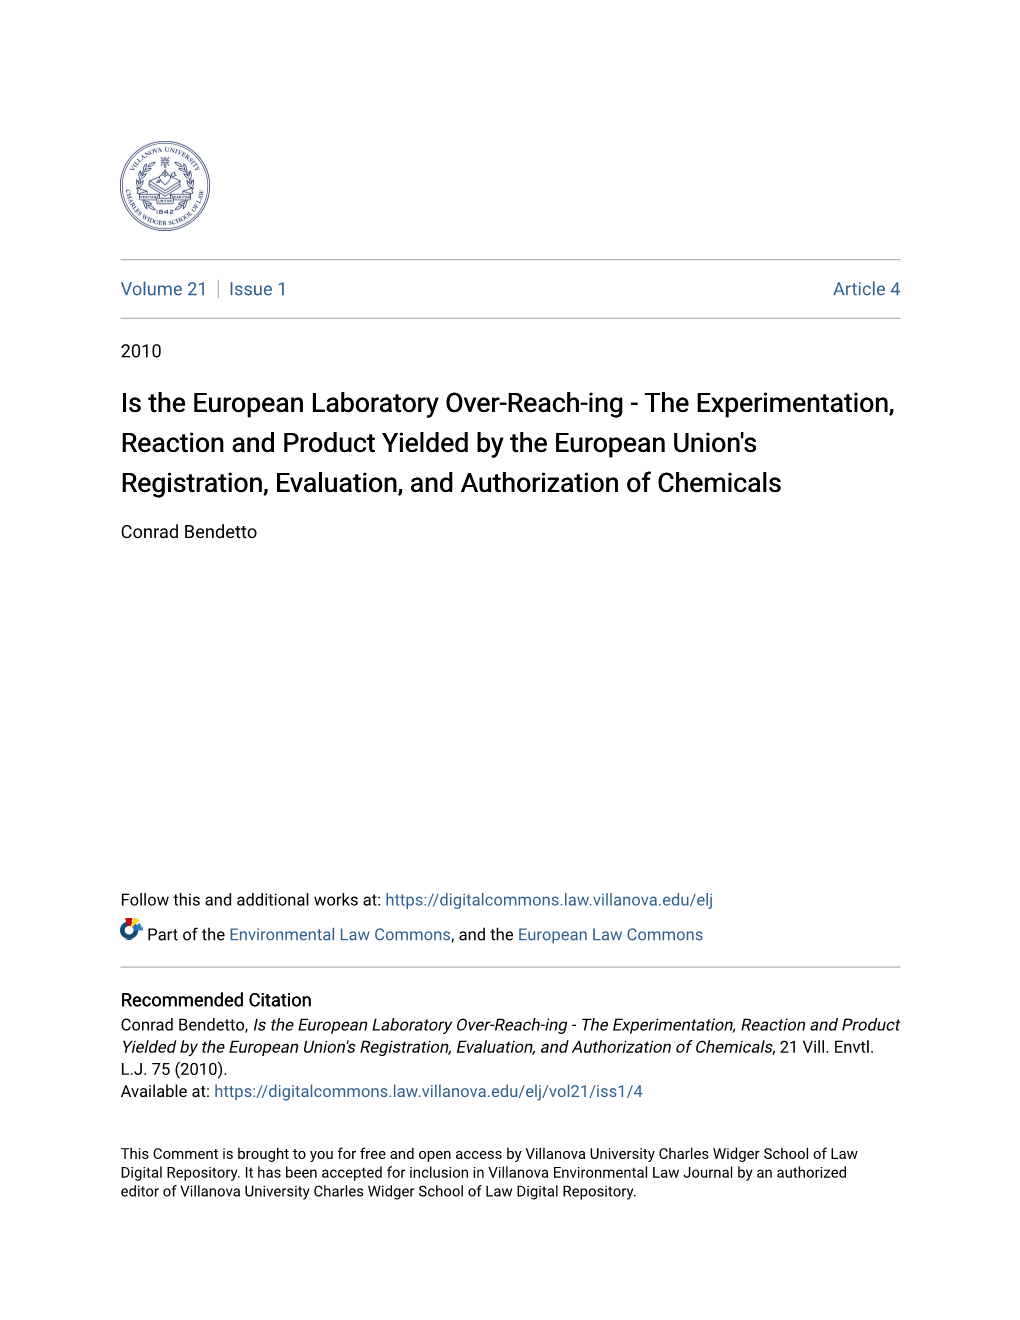 Is the European Laboratory Over-Reach-Ing